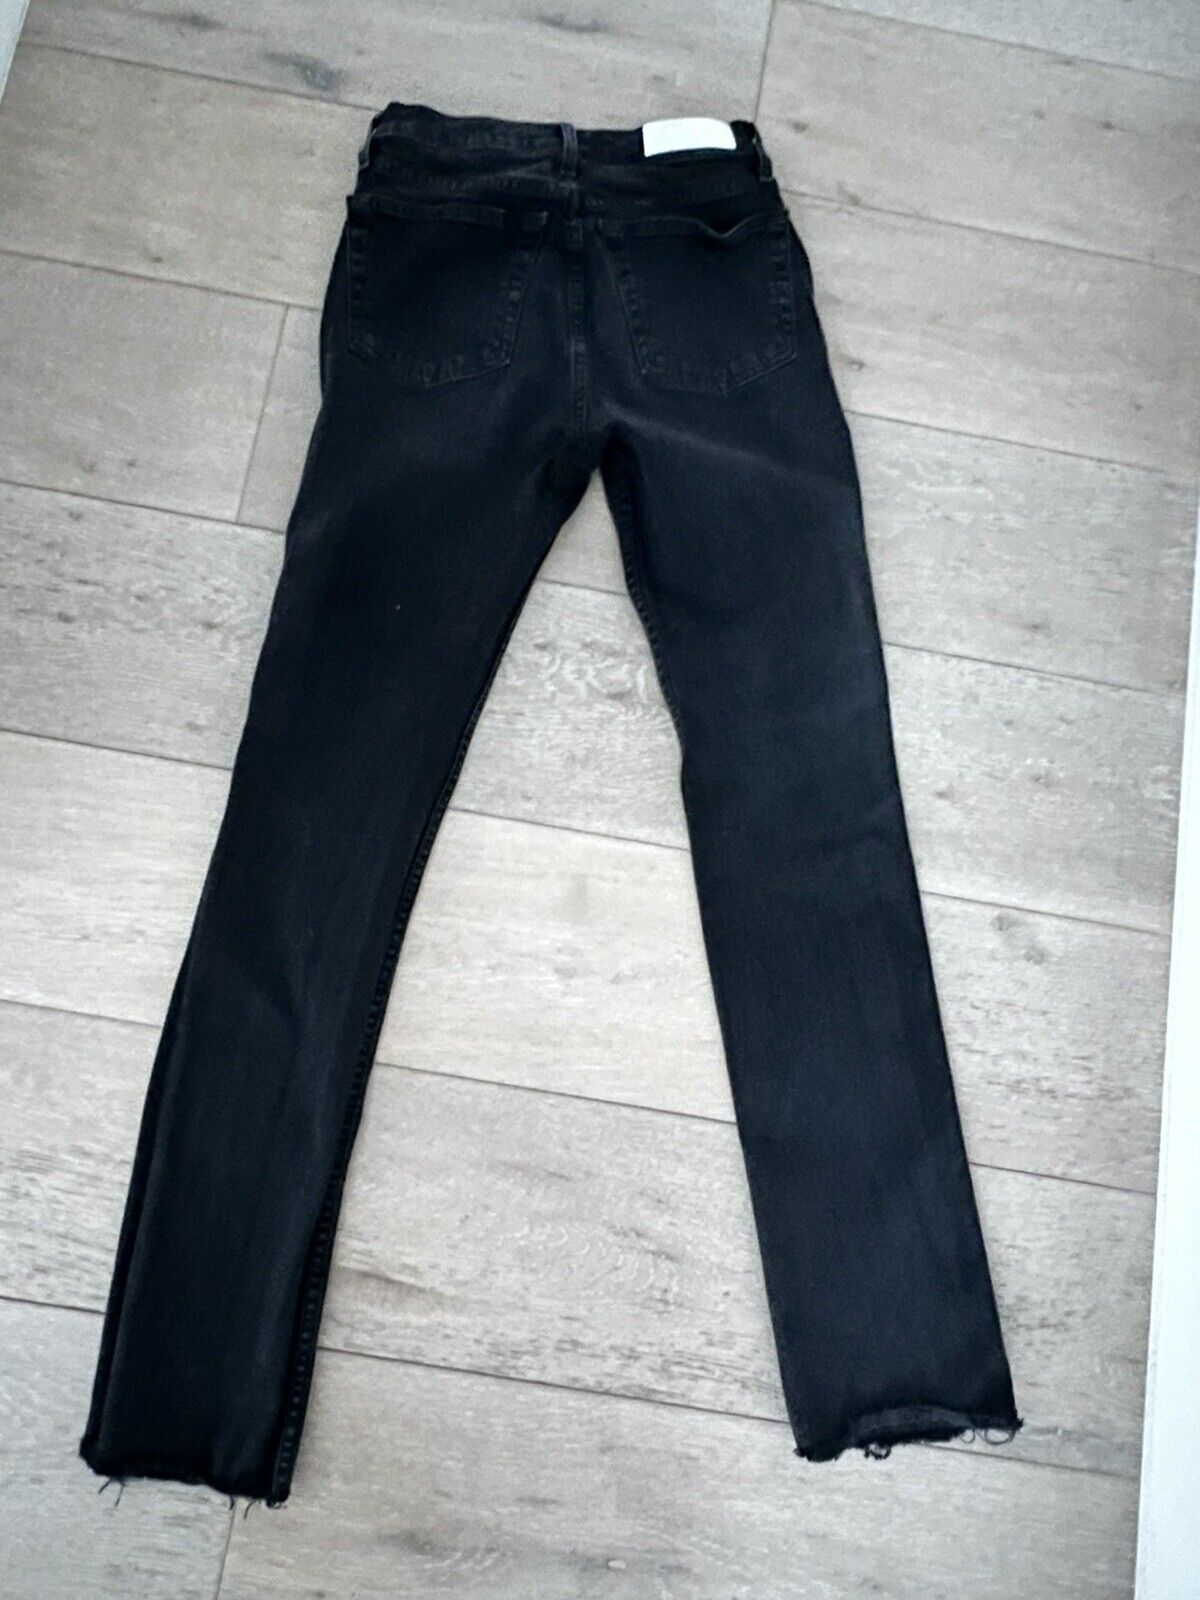 RE / DONE LADIES BLACK JEANS - SIZE 26 - PRE OWNED - image 4